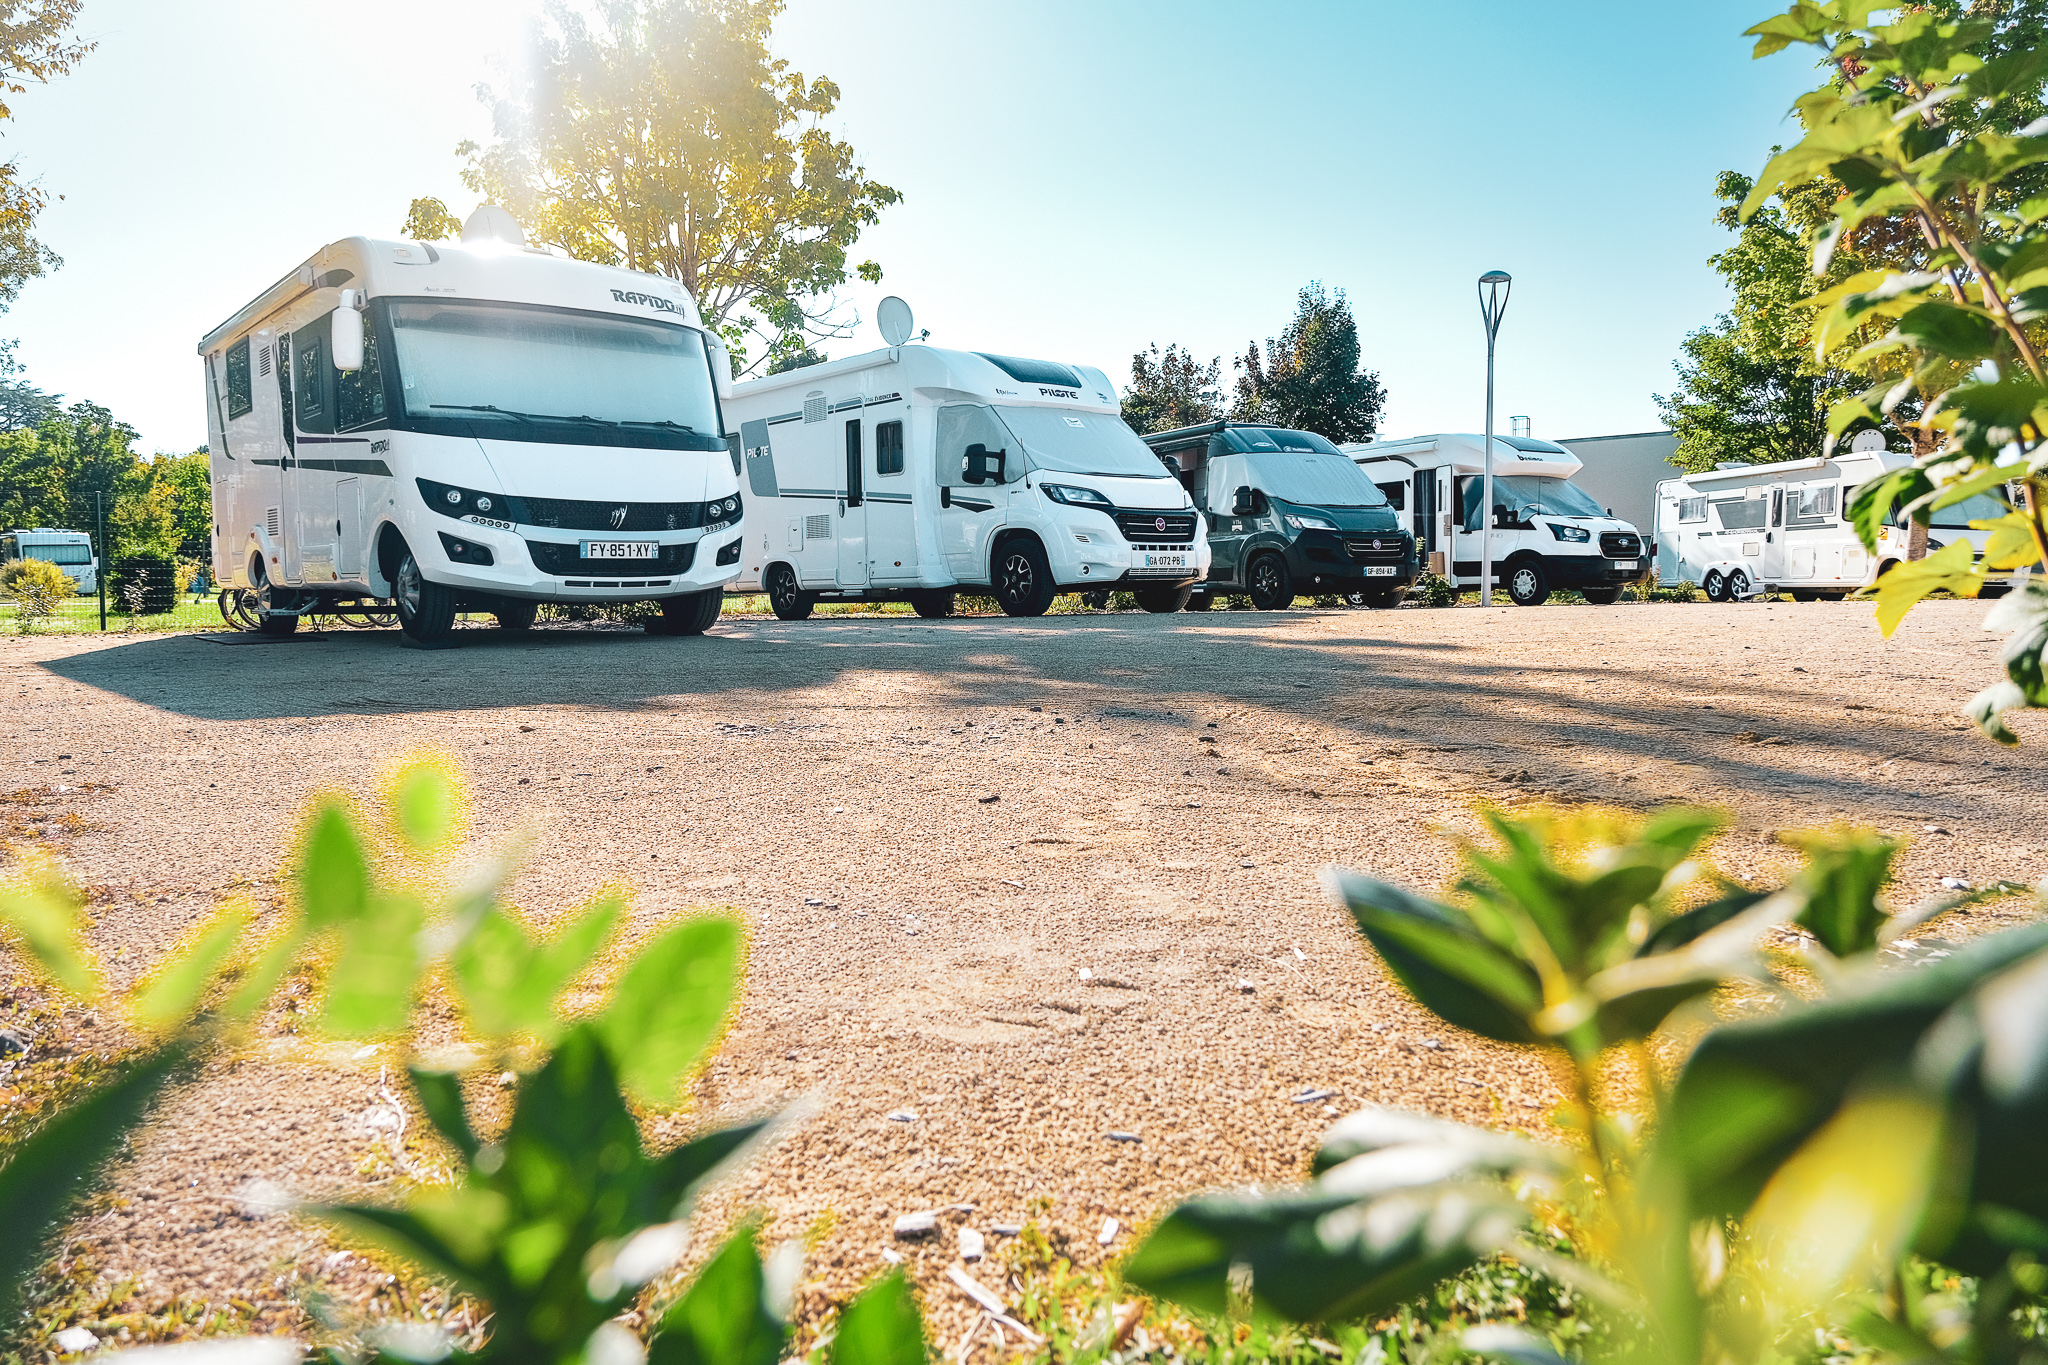 How can motorhome drivers limit their ecological footprint?